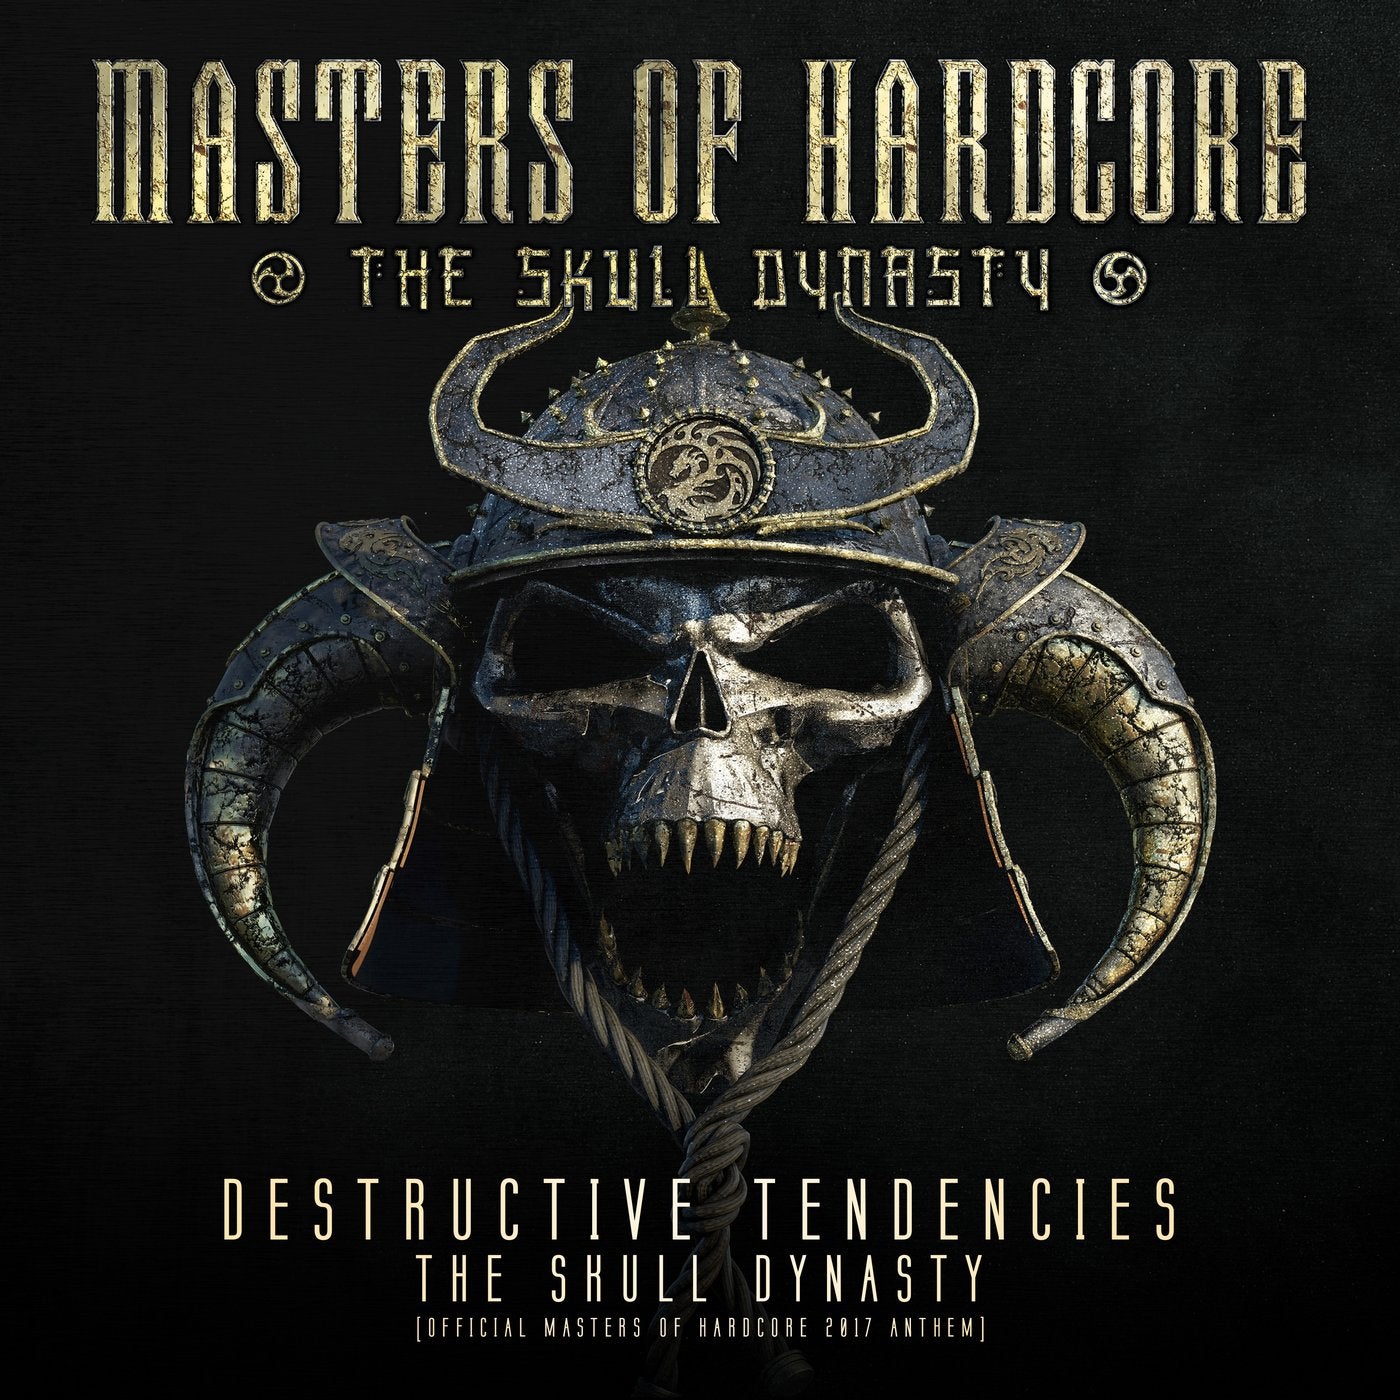 Skull Dynasty - Official Masters Of Hardcore 2017 Anthem